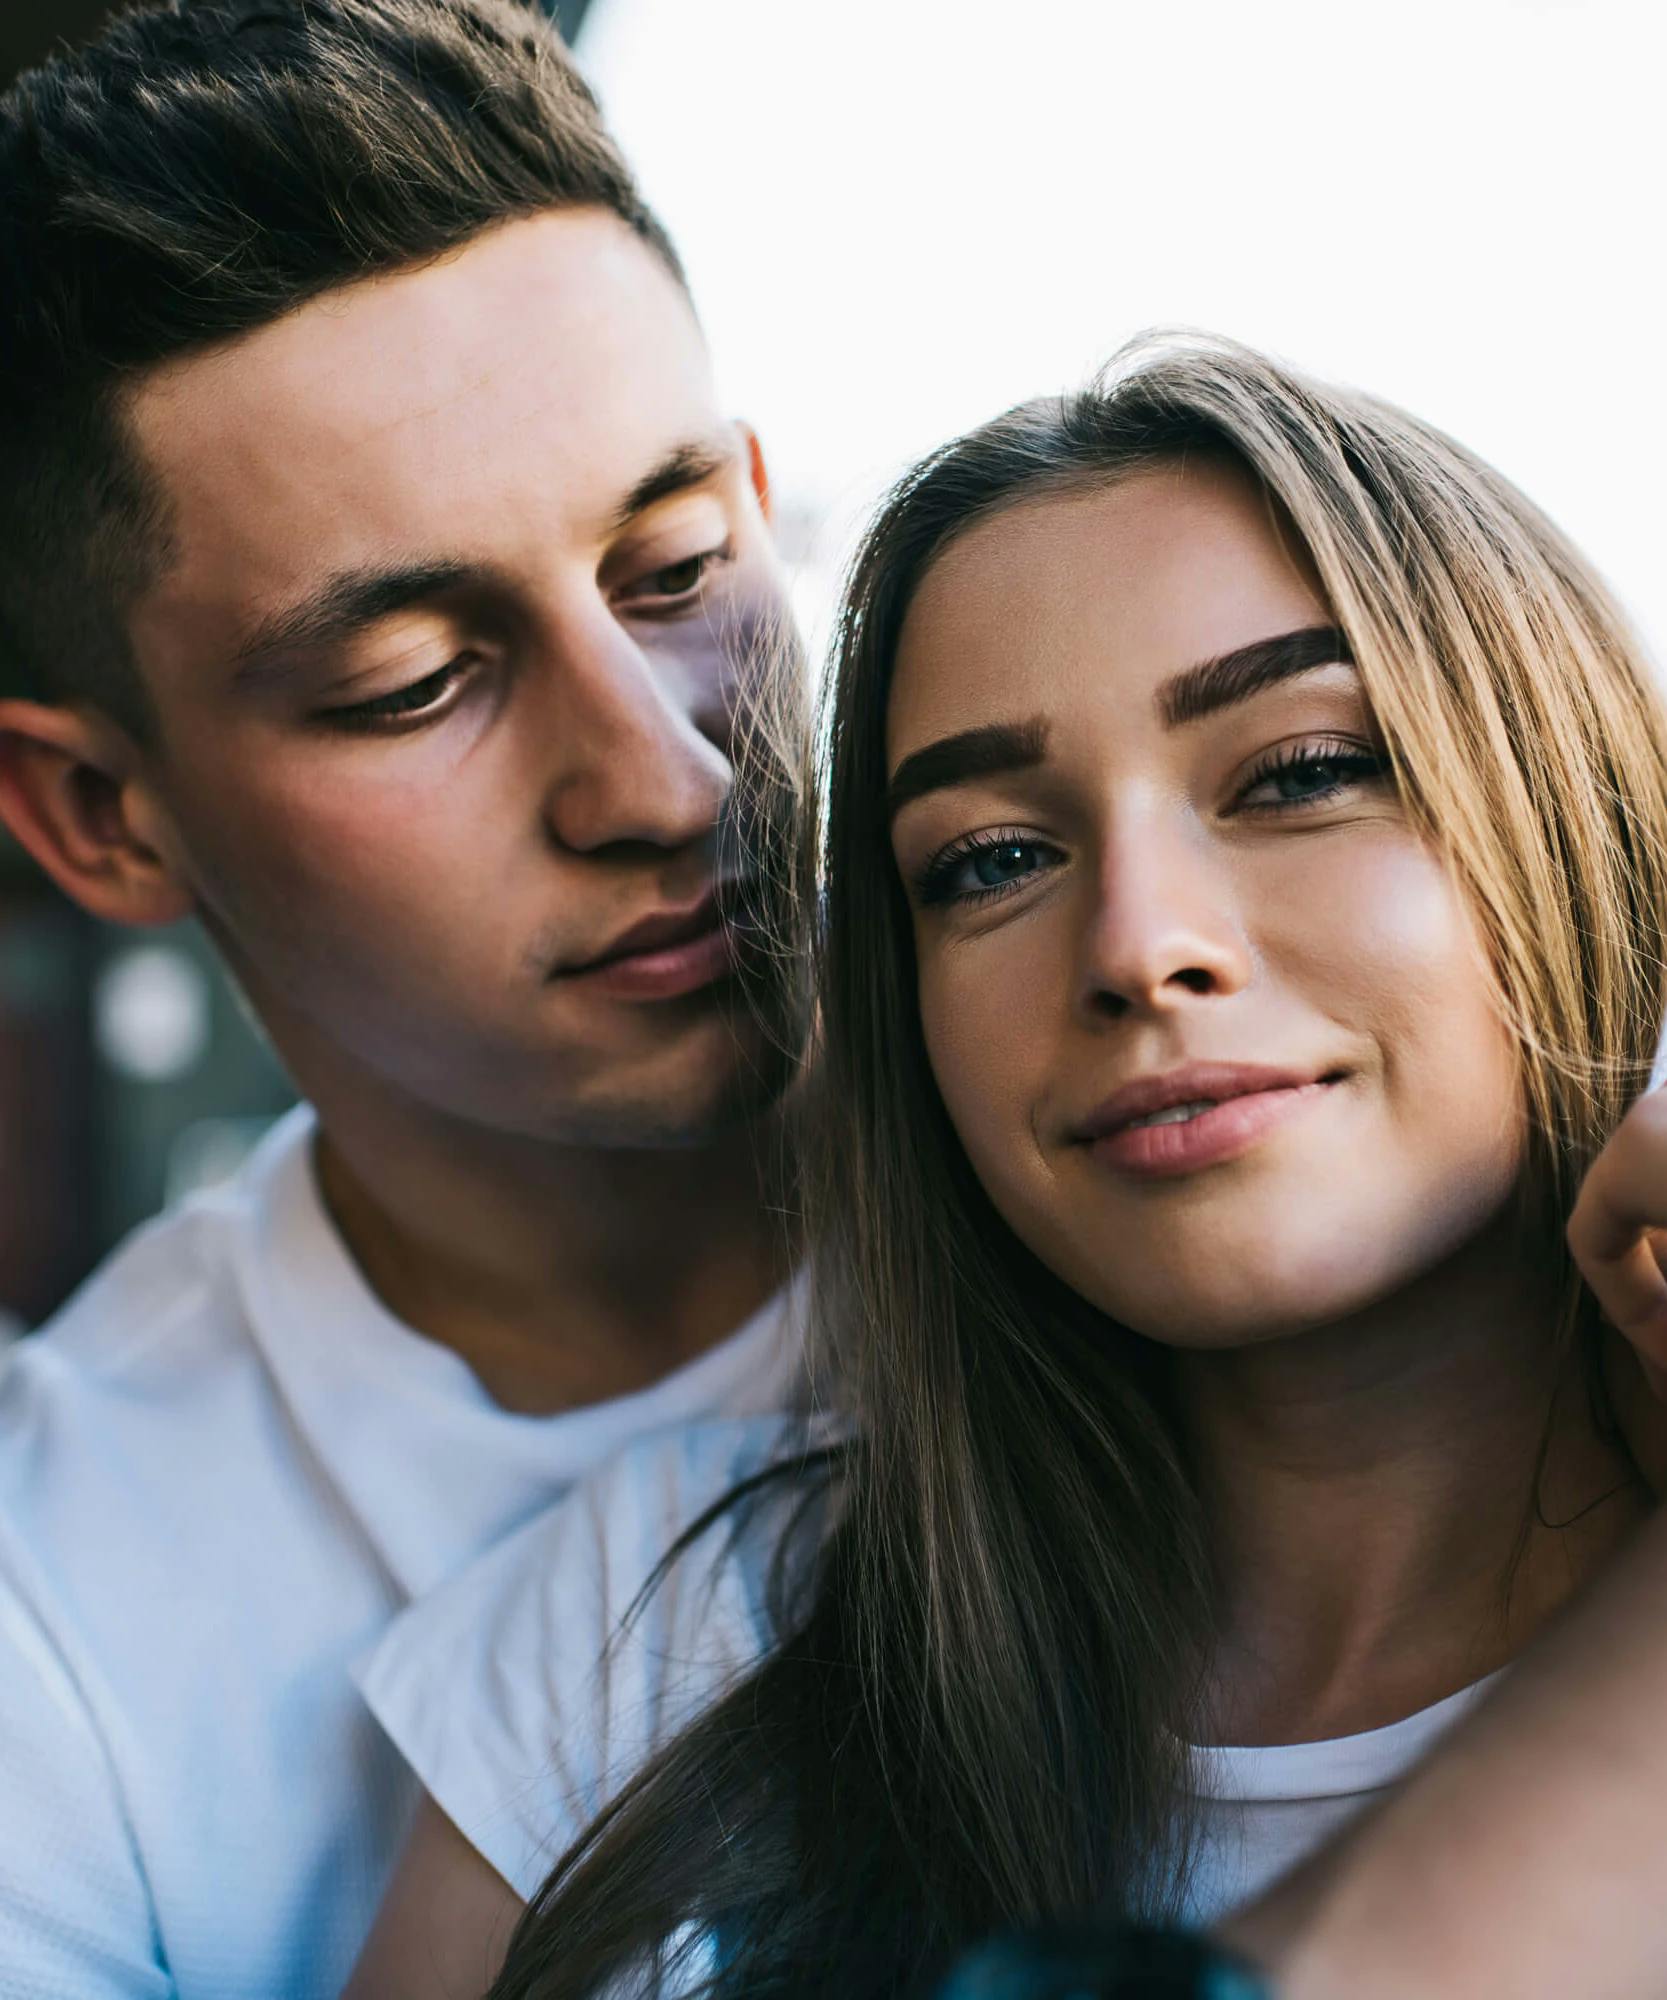 Why We Stop Liking A Guy The Second He Returns Interest